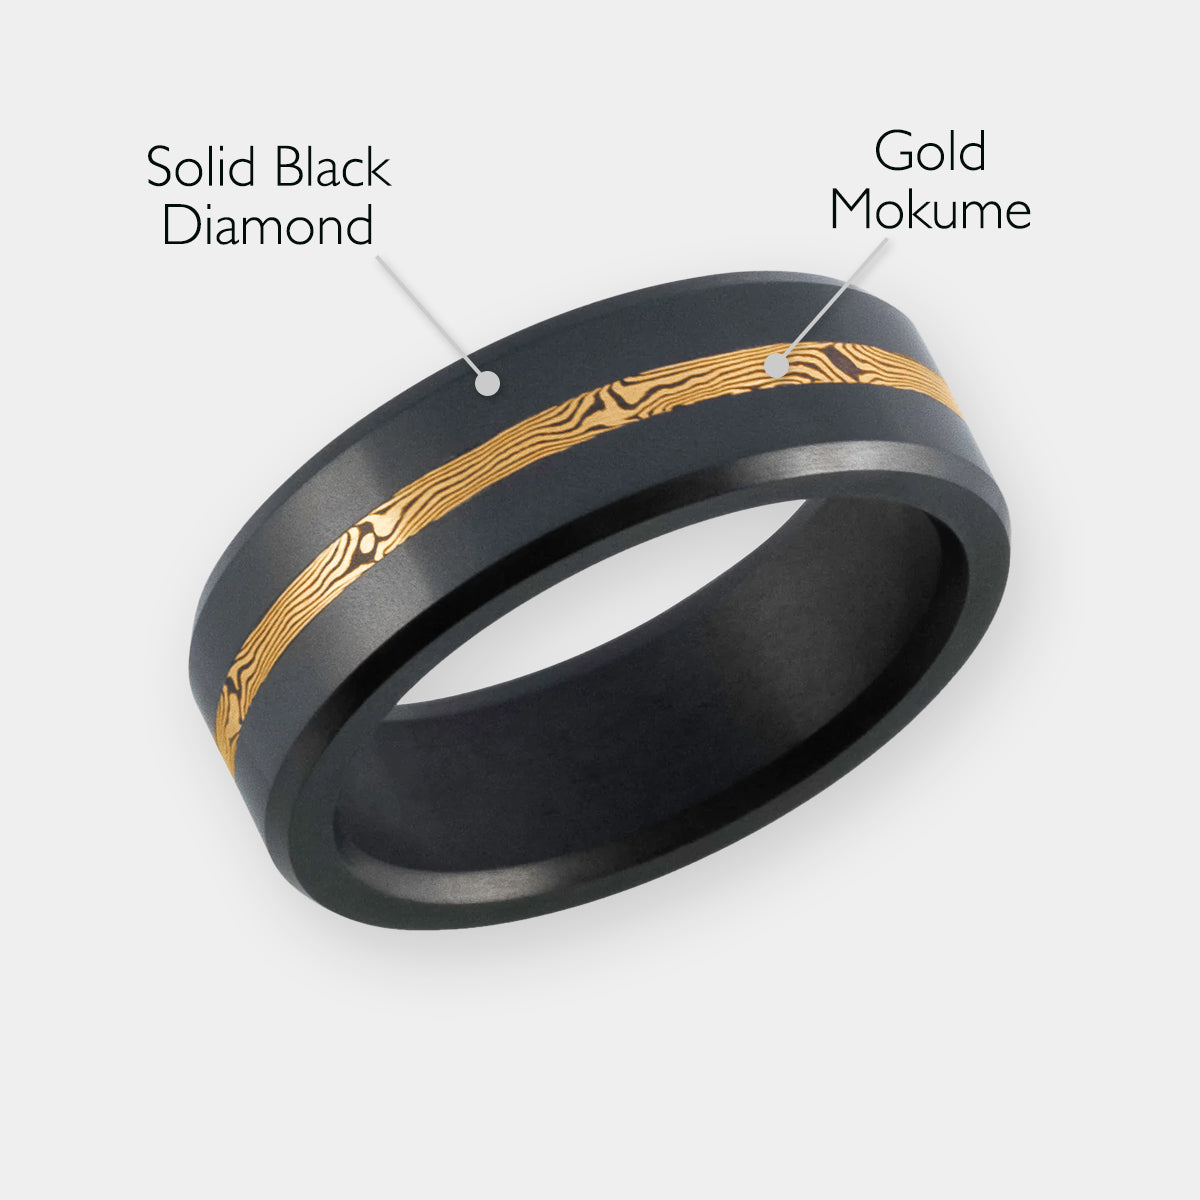 Men's Black Diamond & Mokume 14k Gold Inlay with material descriptions listed | Elysium ARES | Men’s Mokume Gold Rings | Mokume Gold & Black Diamond Wedding Ring